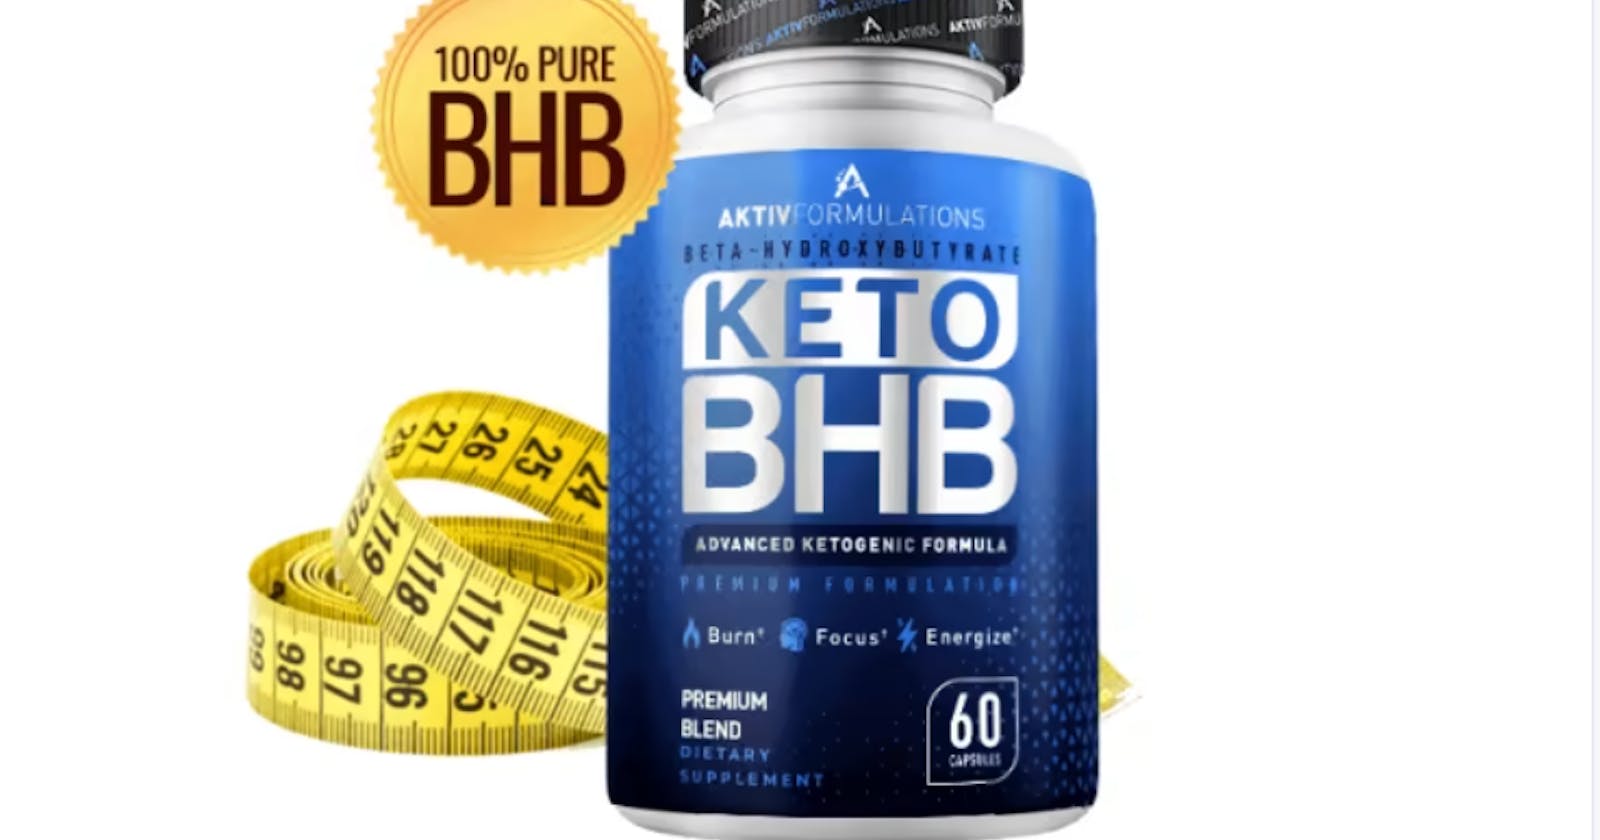 Keto BHB Reviews, Shop, Weight Loss For US, Shark Tank, Diet Pills, Official Website & Where To Buy?